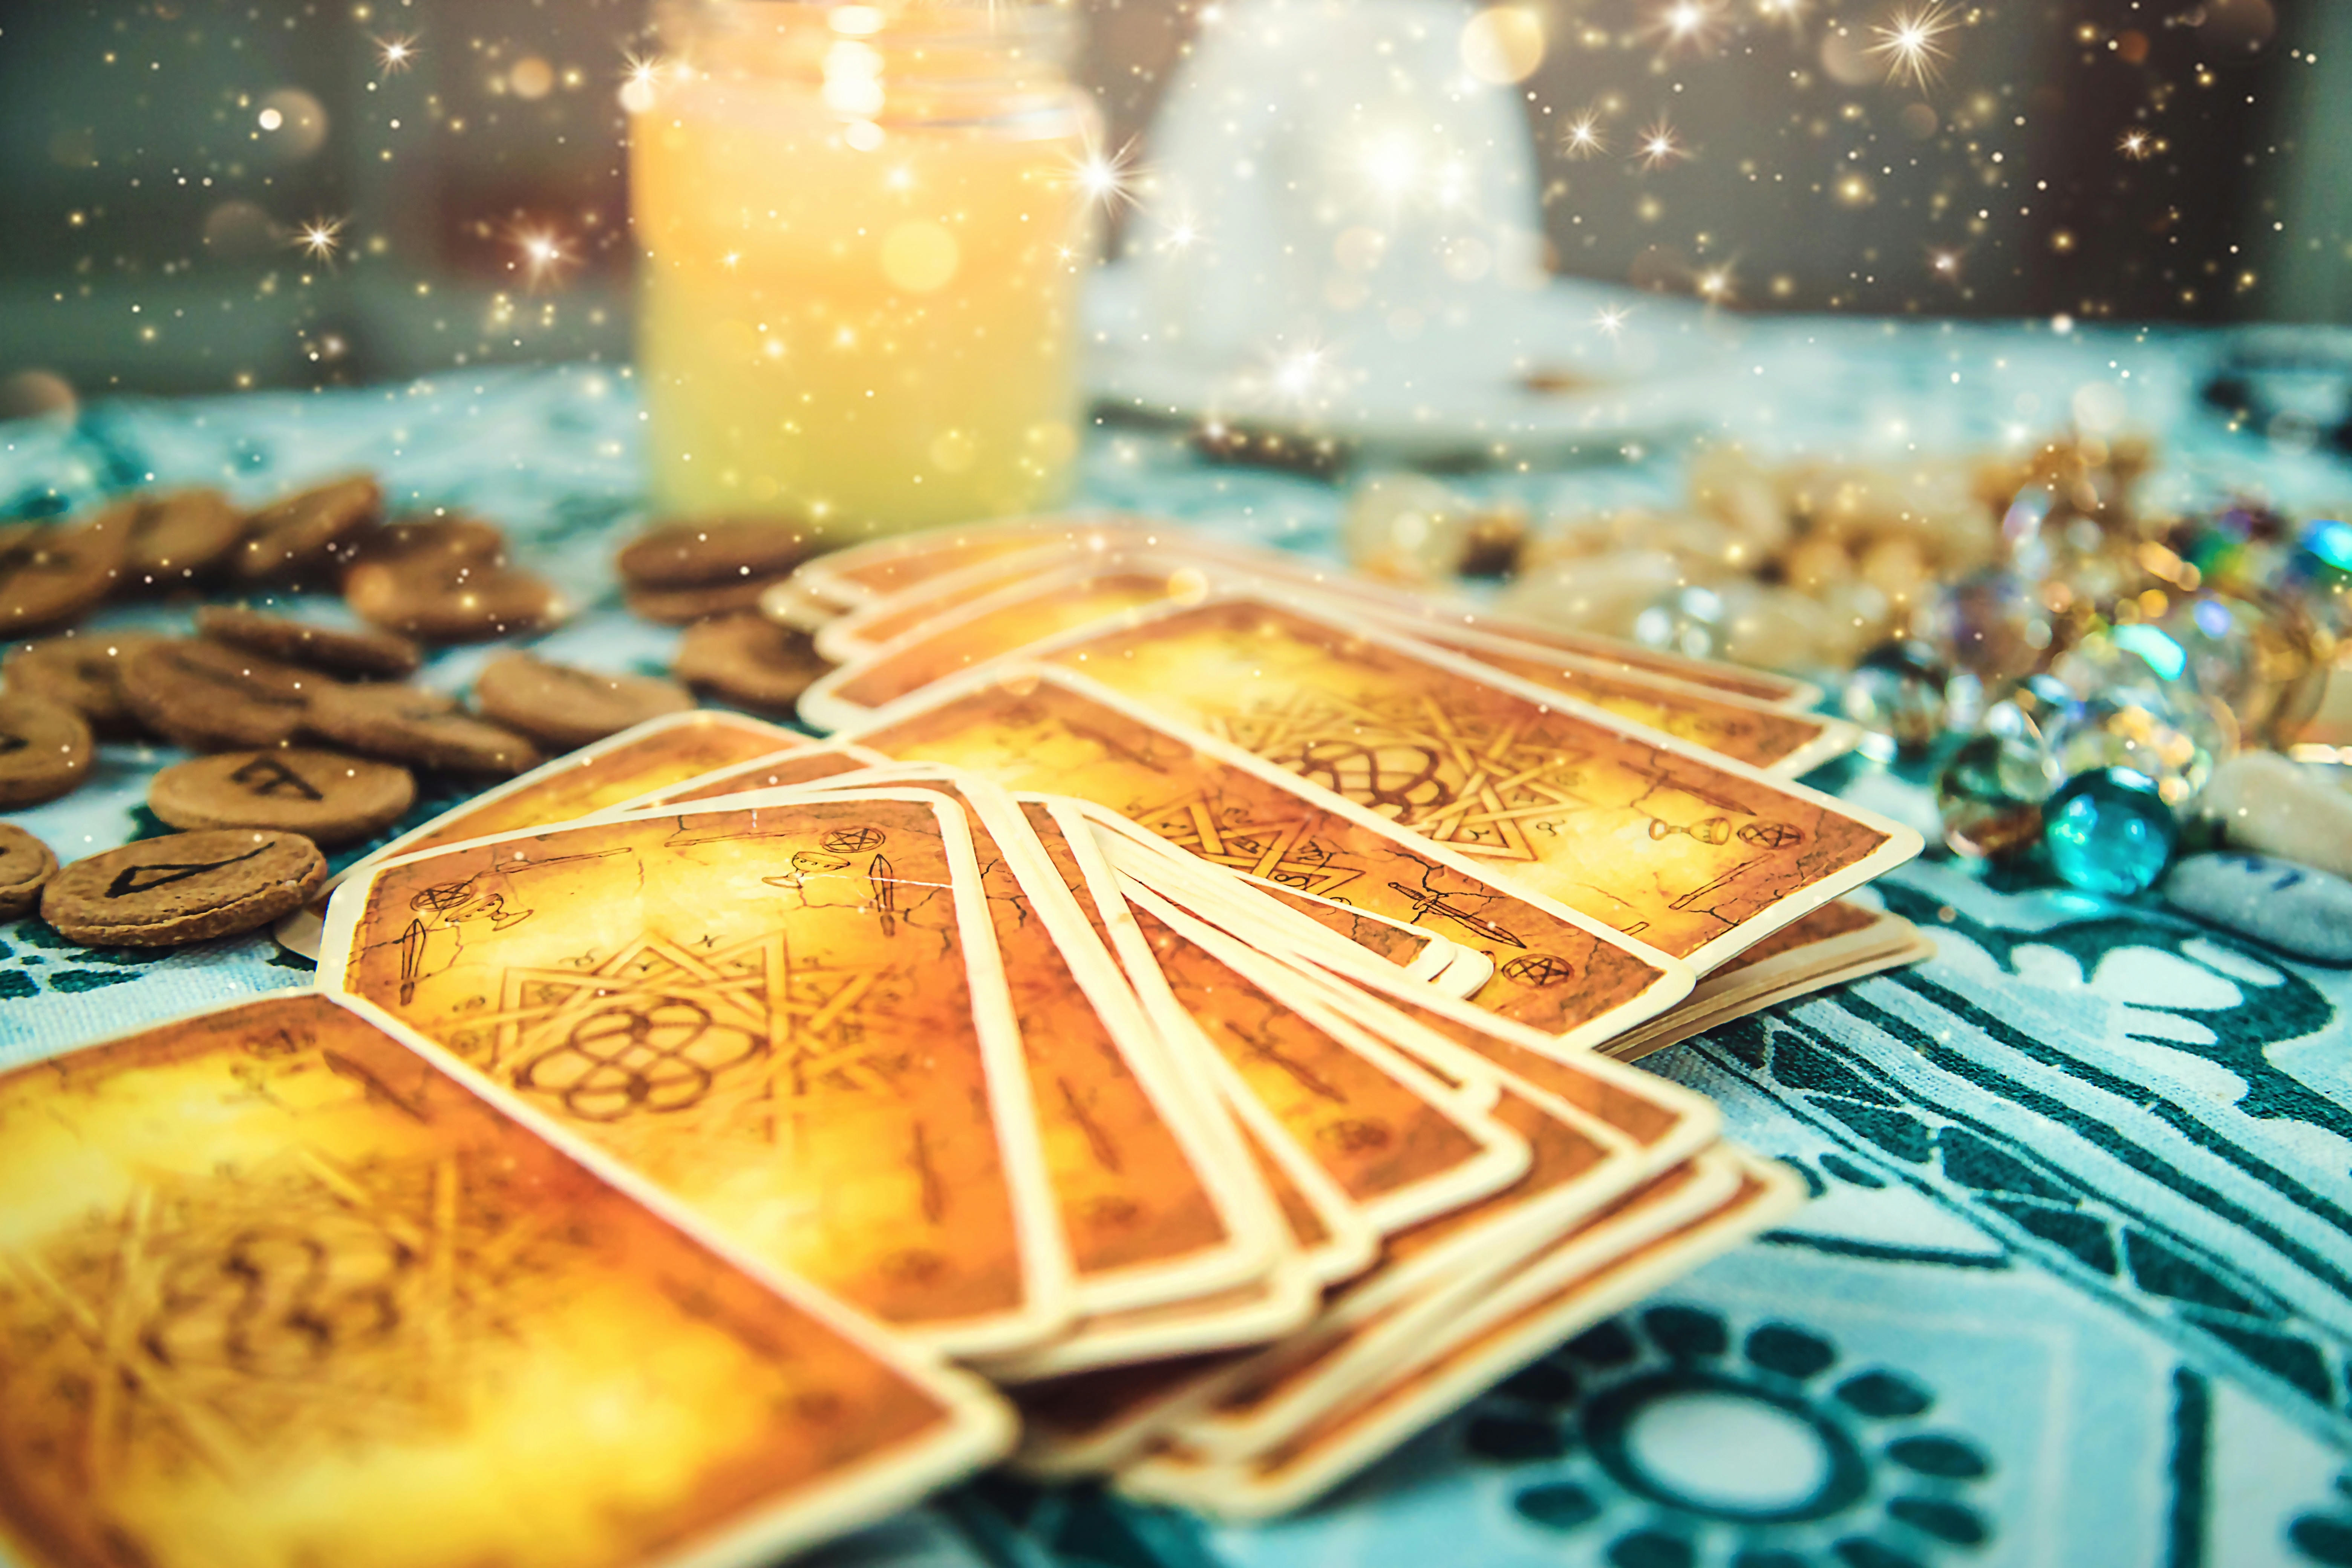 Image of orange tarot cards prior to a reading